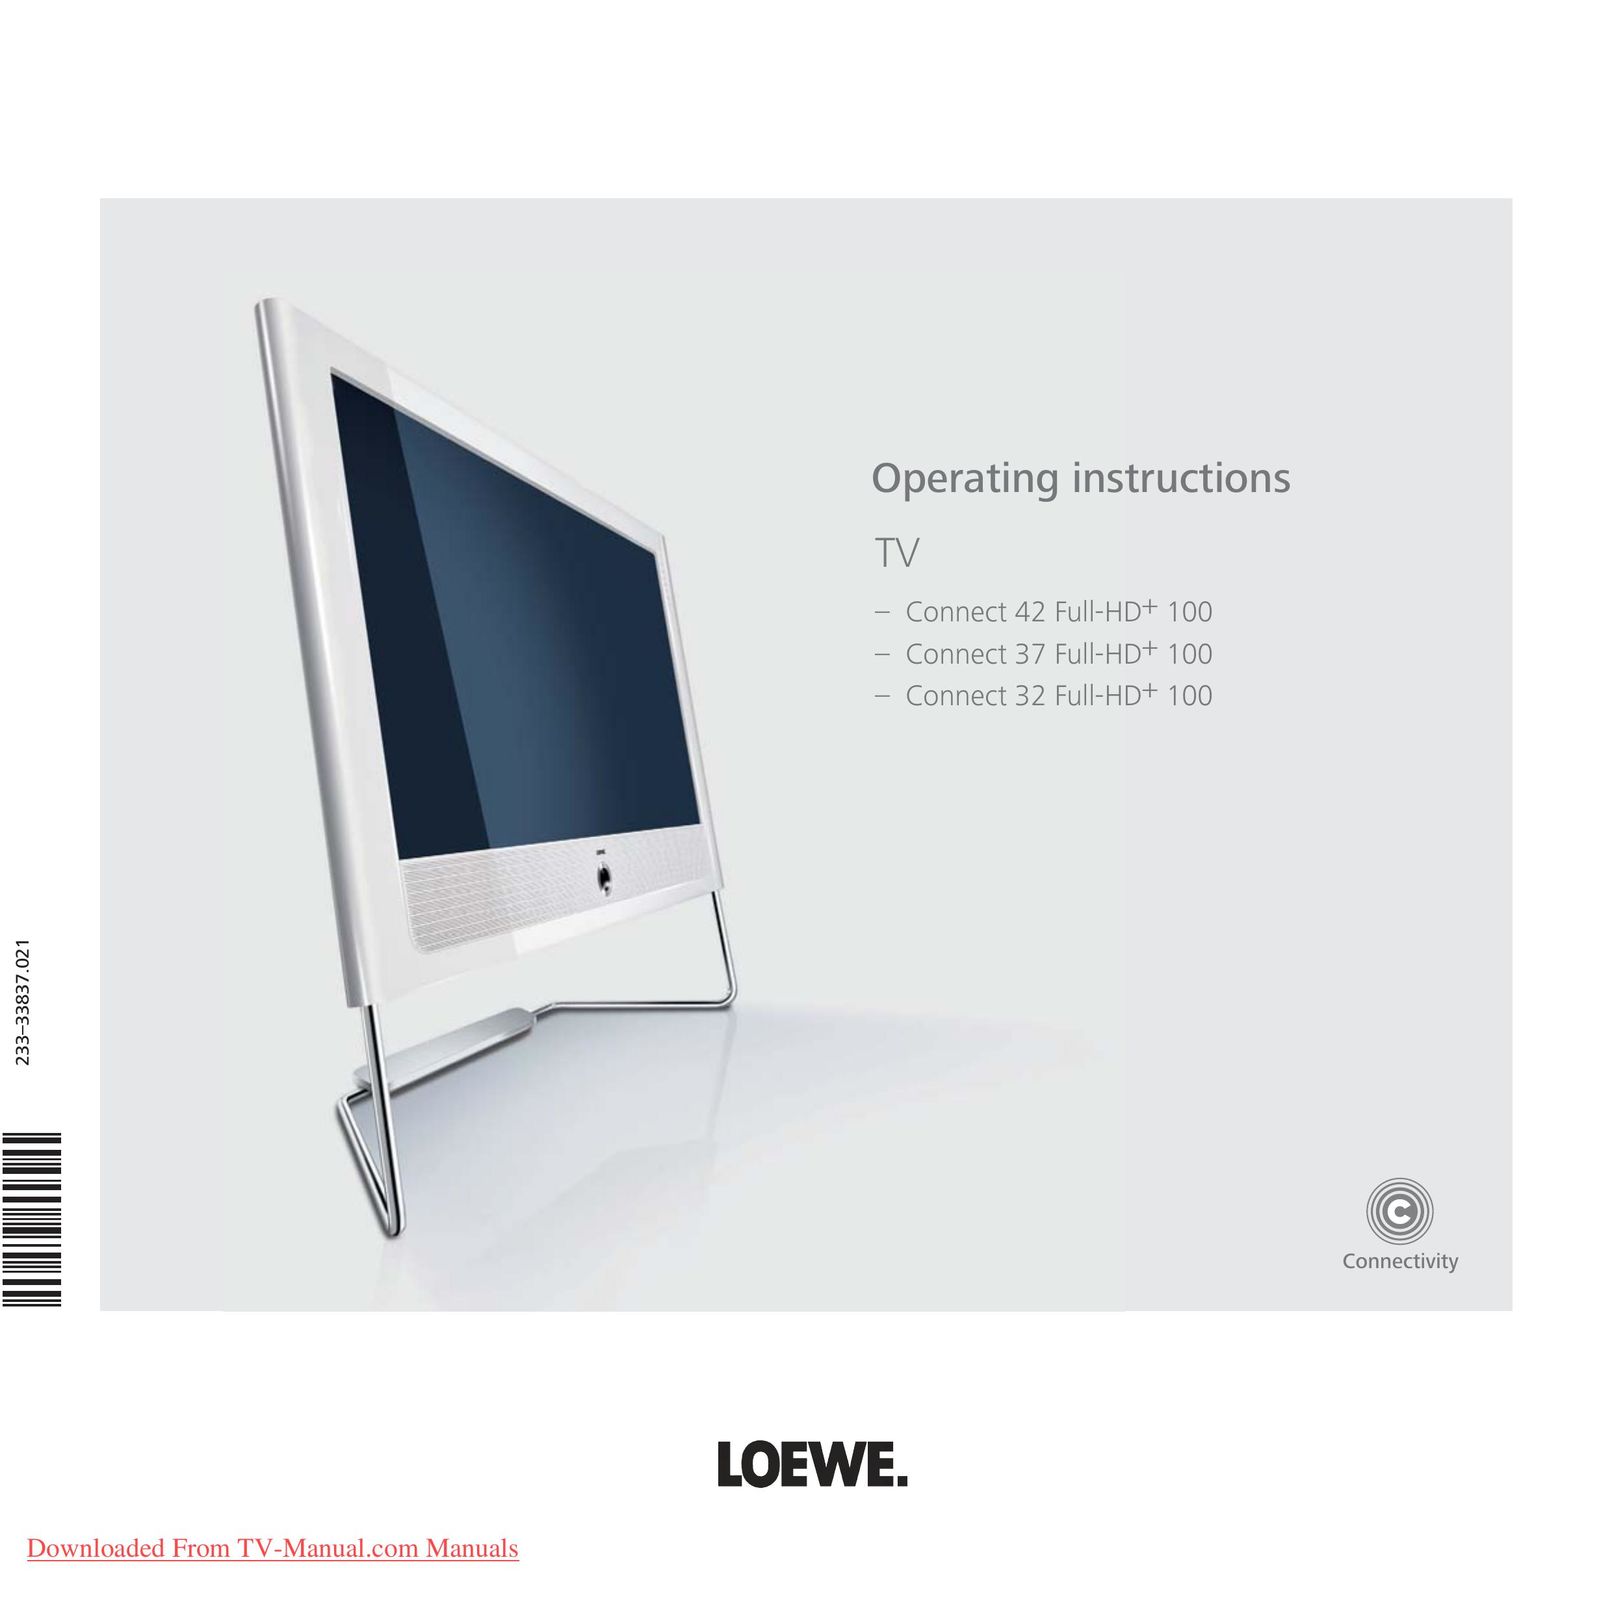 Loewe Connect 37 Full-HD+ 100 CRT Television User Manual